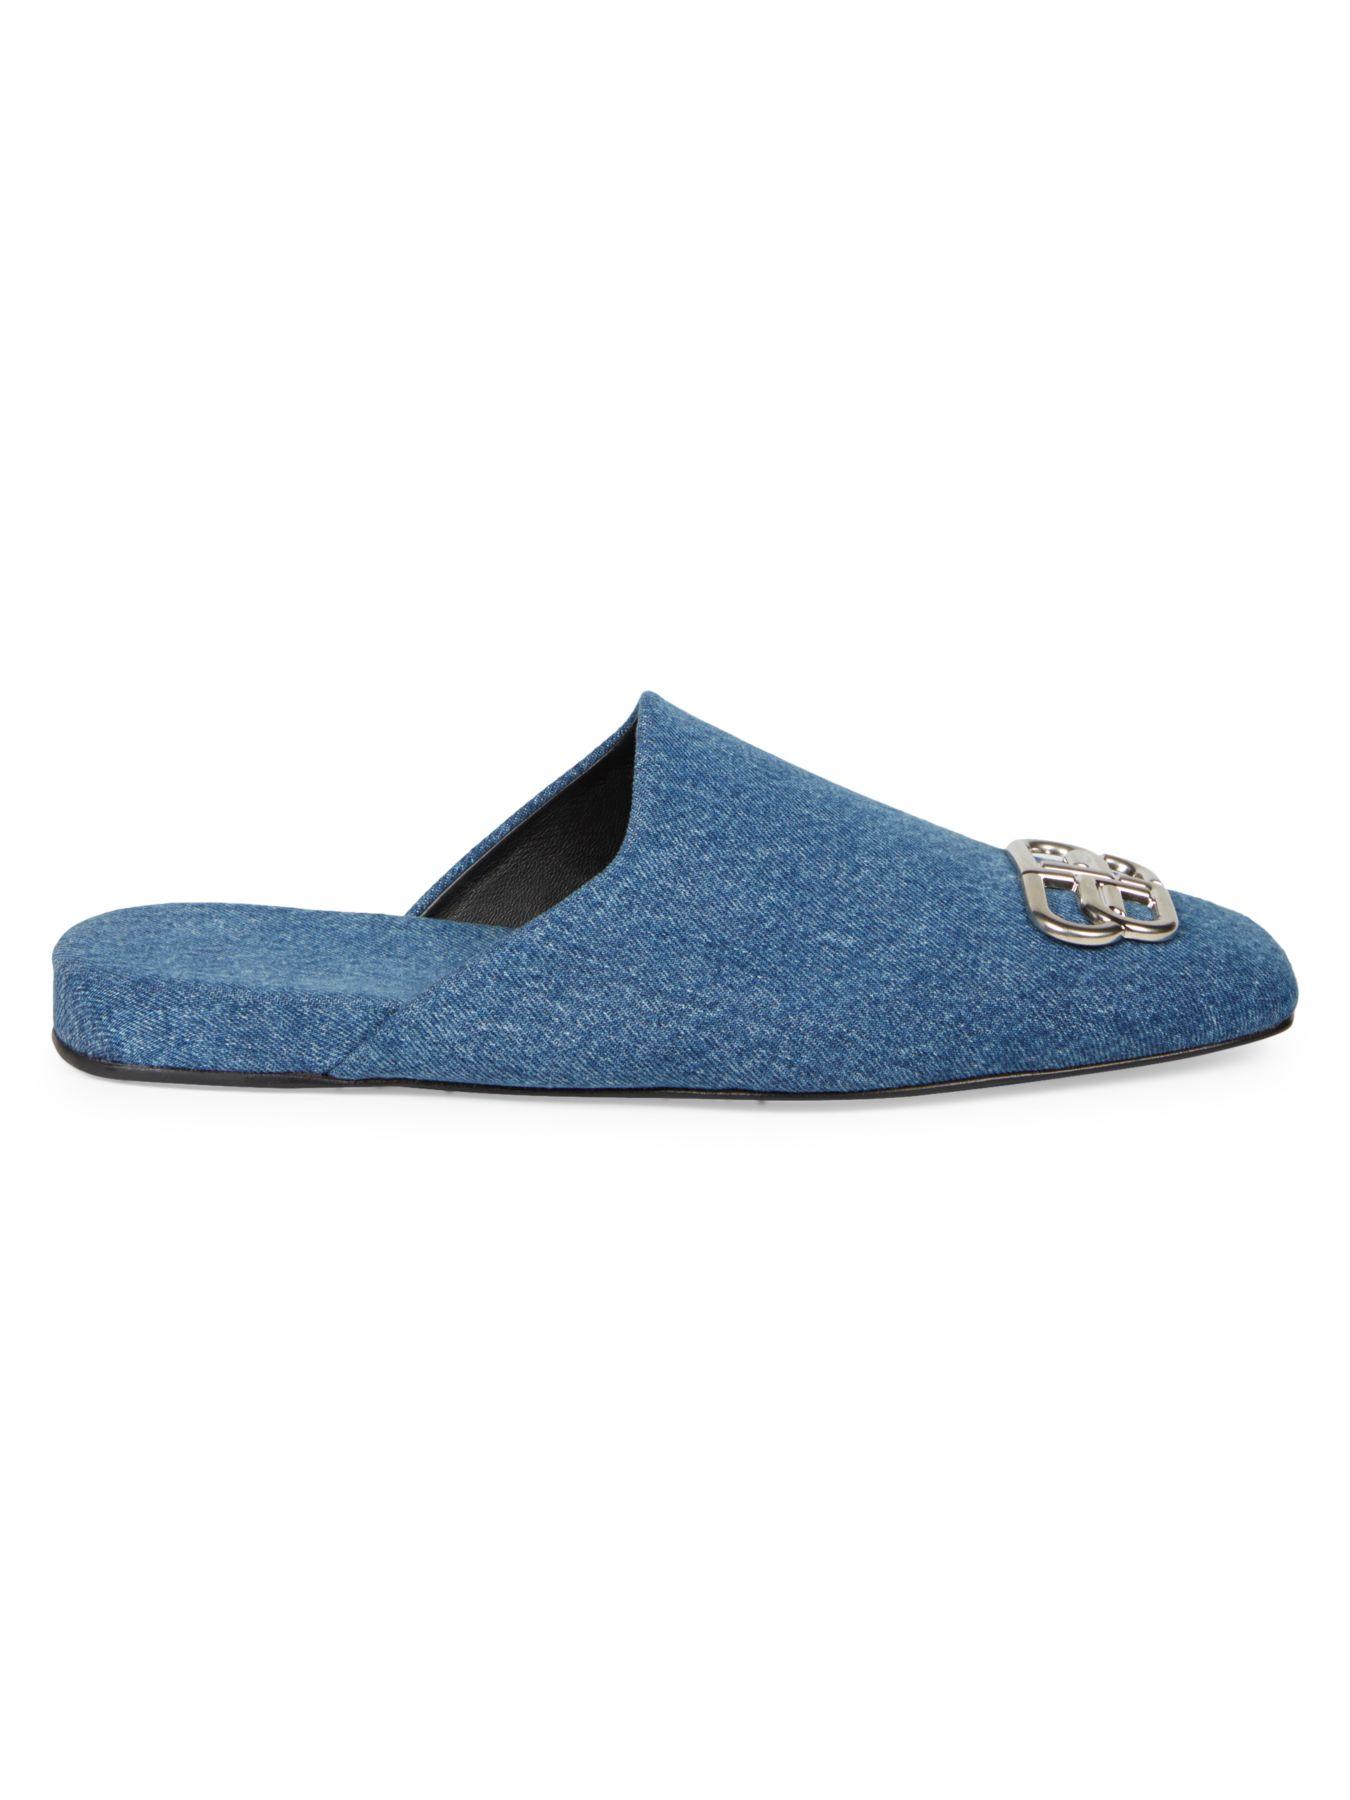 Balenciaga Bb Cosy Leather Mule in Blue for Men - Lyst